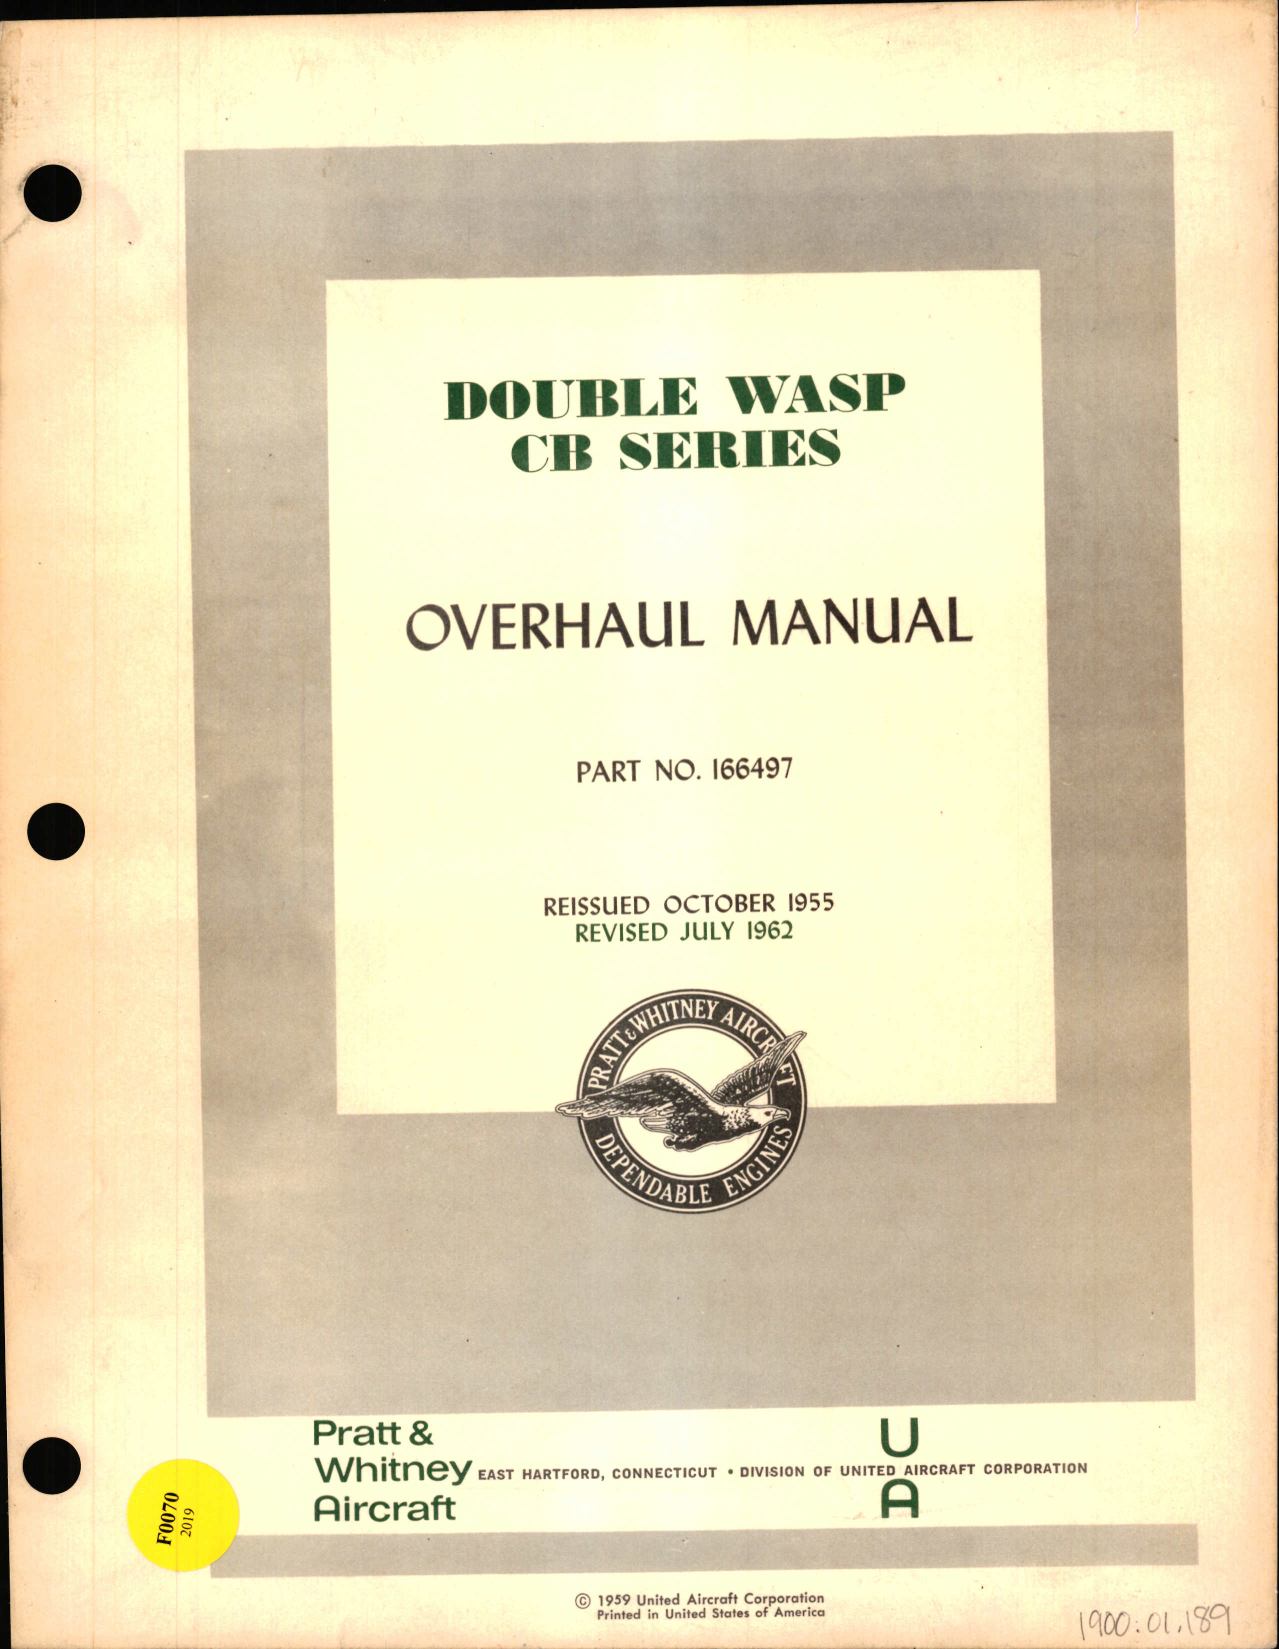 Sample page 1 from AirCorps Library document: Overhaul Manual for Double Wasp CB Series